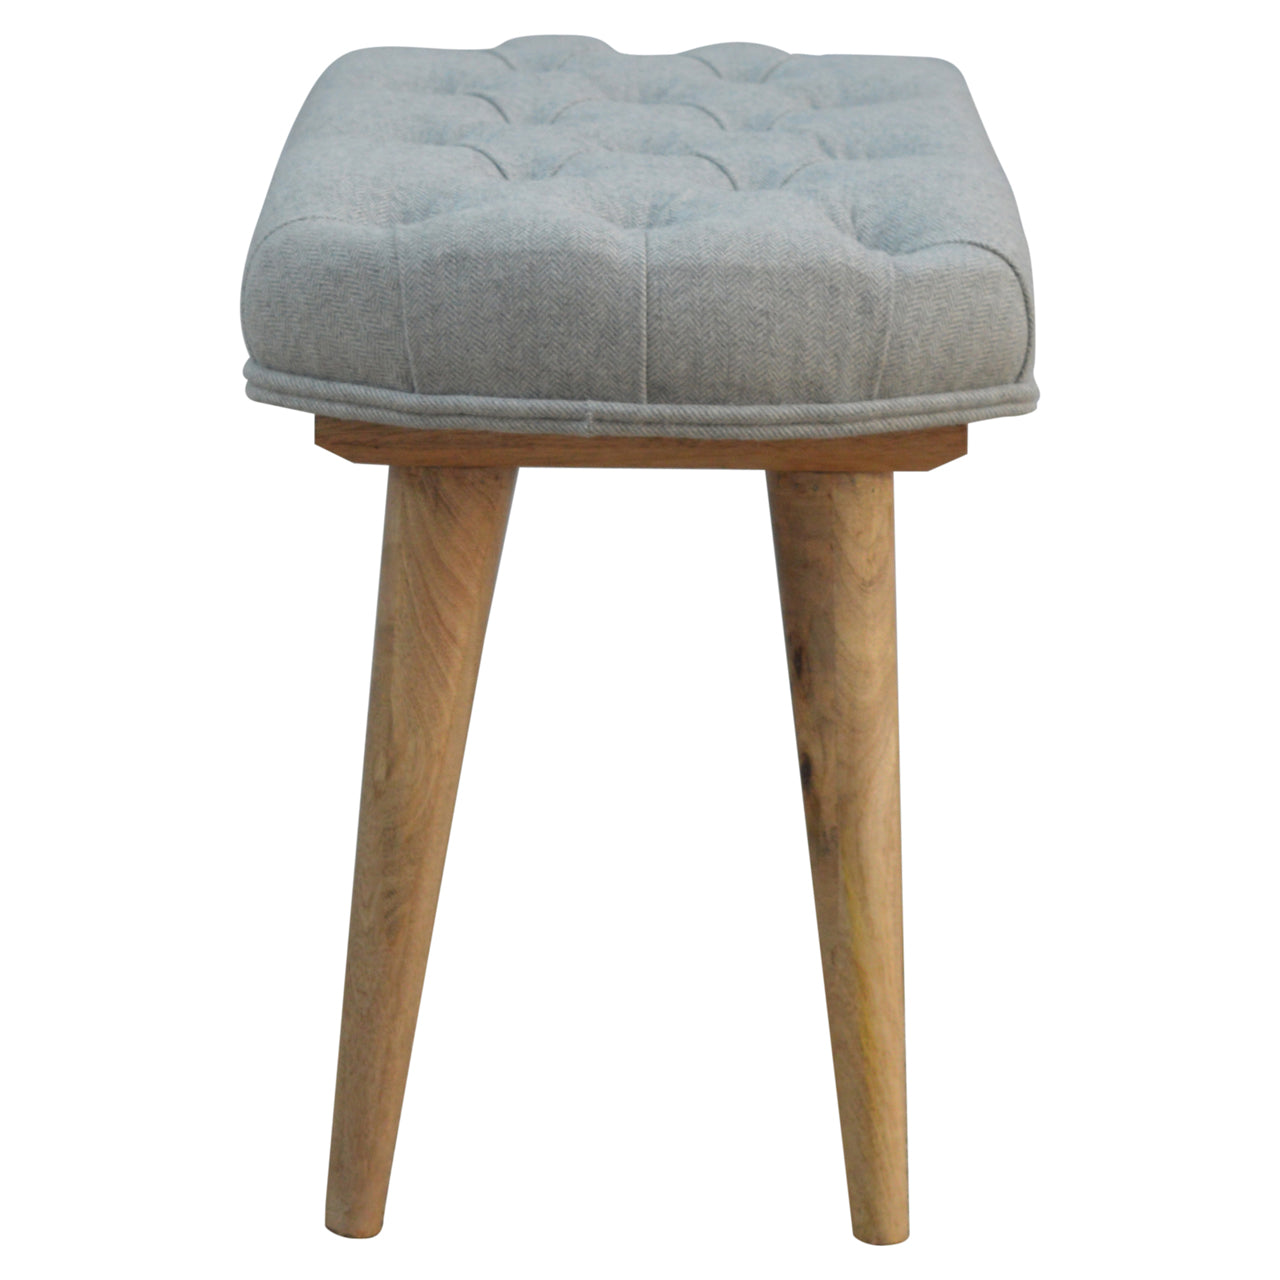 Nordic Style Bench with Deep Buttoned Grey Tweed Top